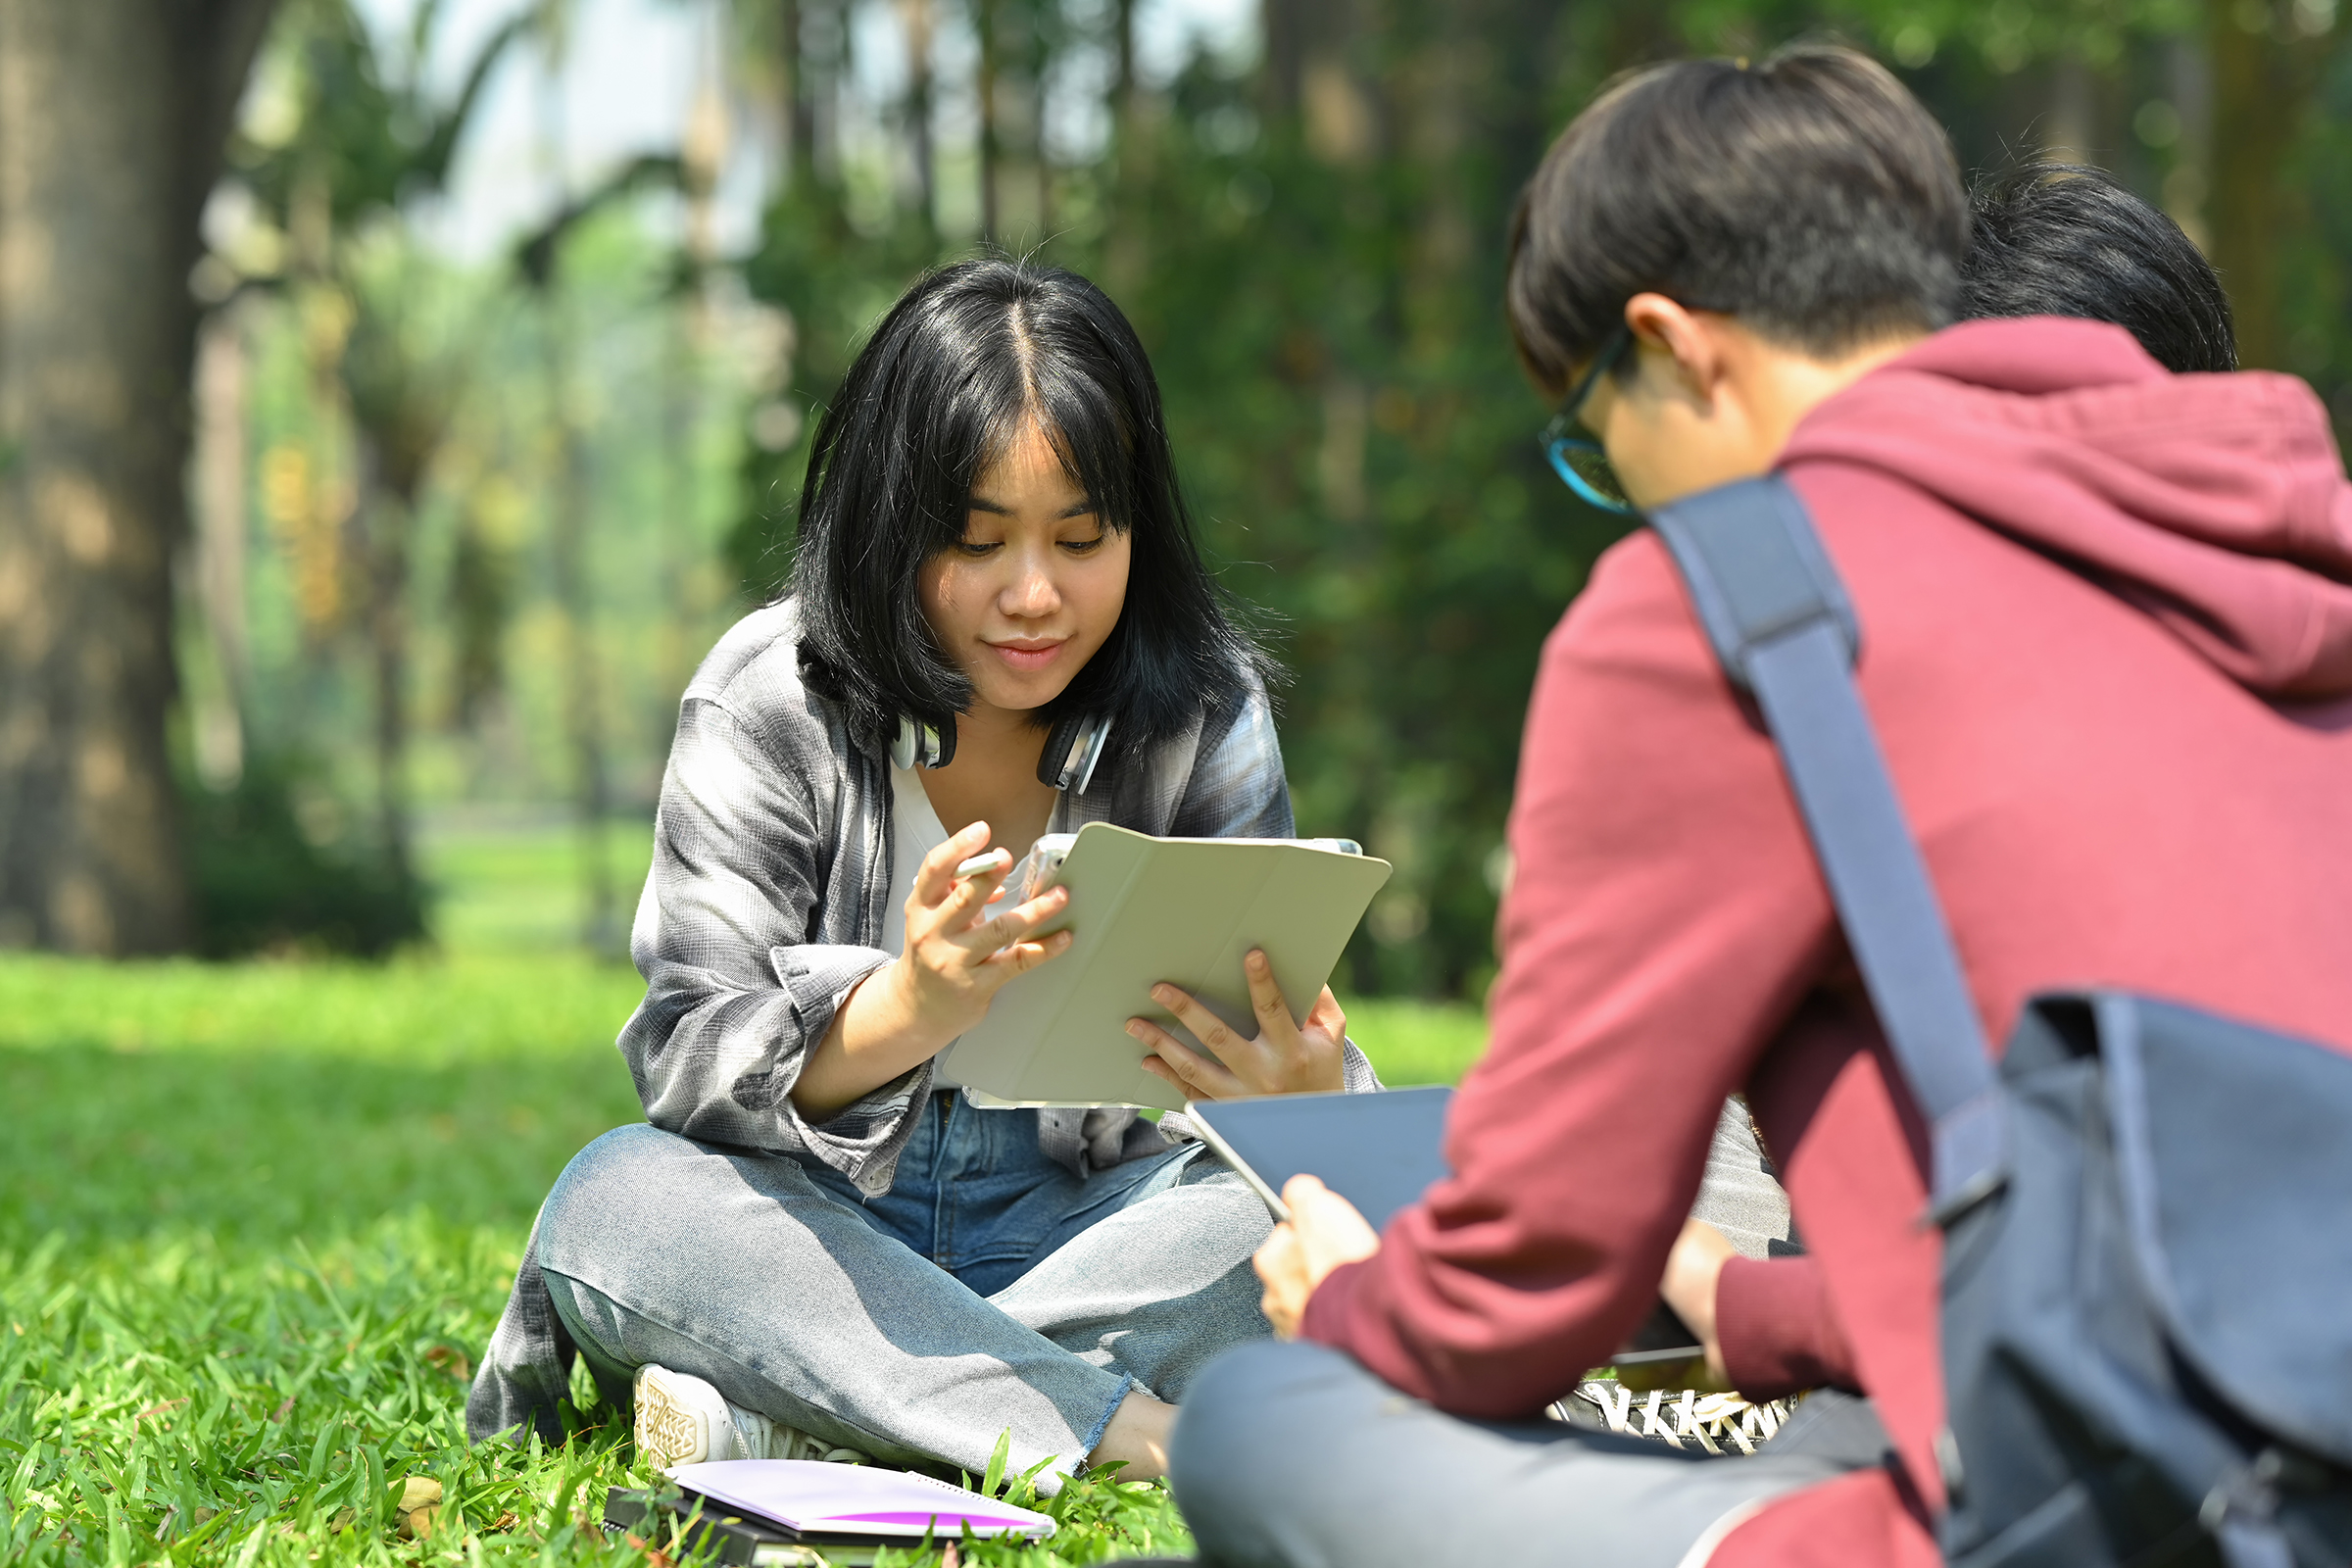 Image of asian female student reading books with her friends at summer park. Education and lifestyle concept.